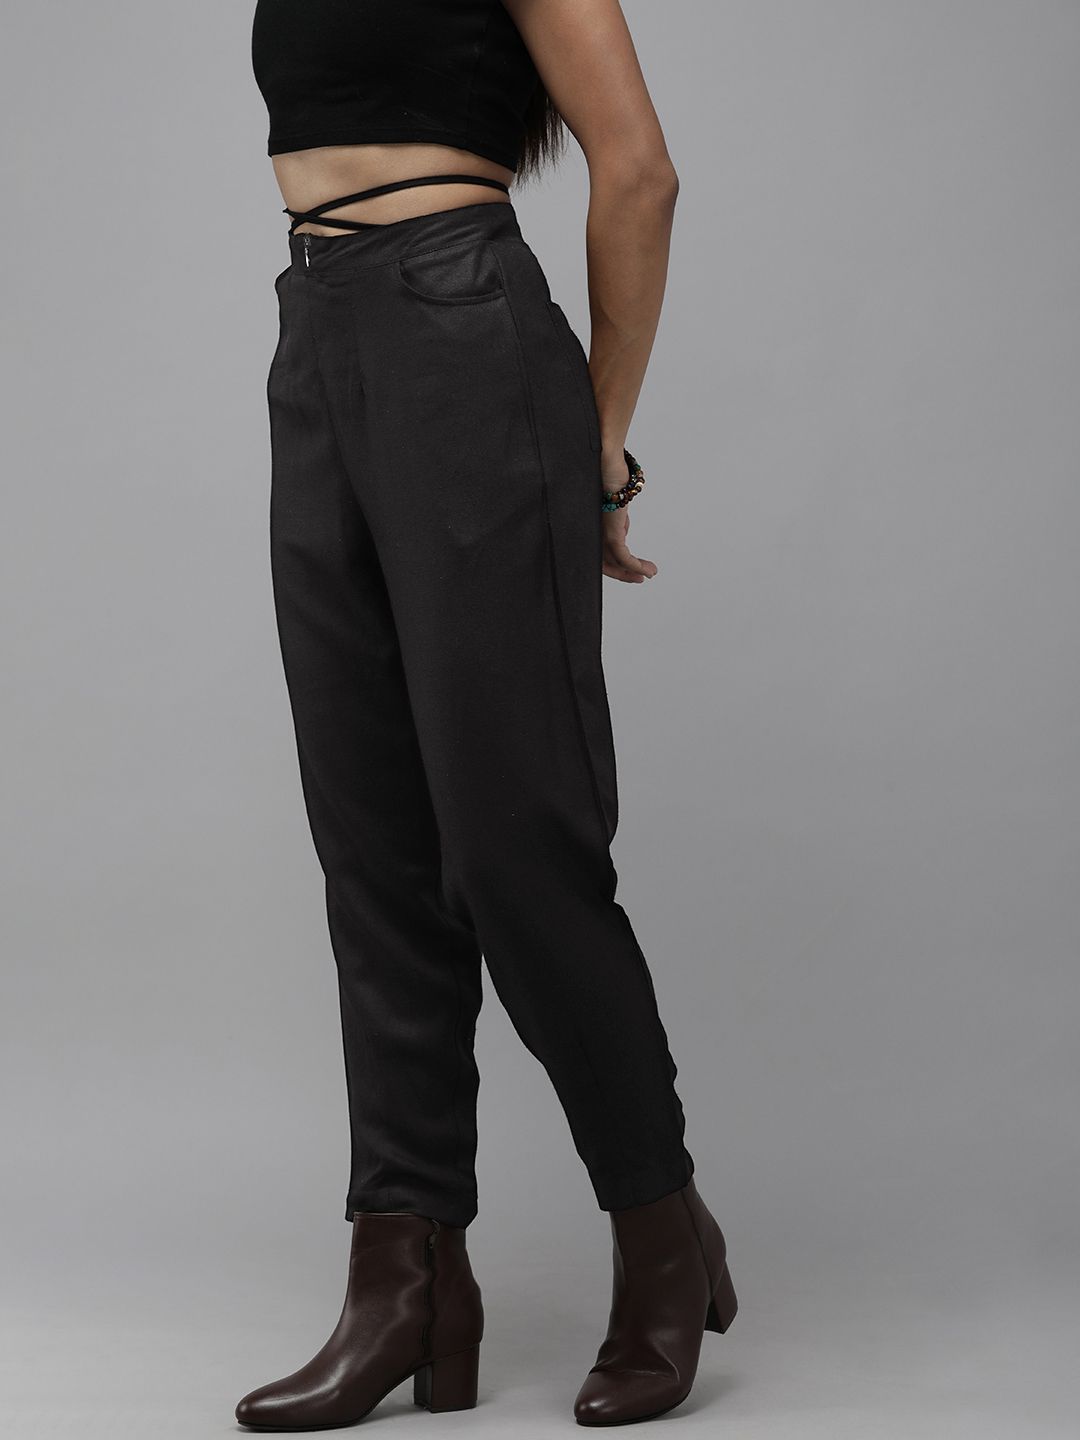 The Roadster Lifestyle Co. Women Black Solid Trousers Price in India